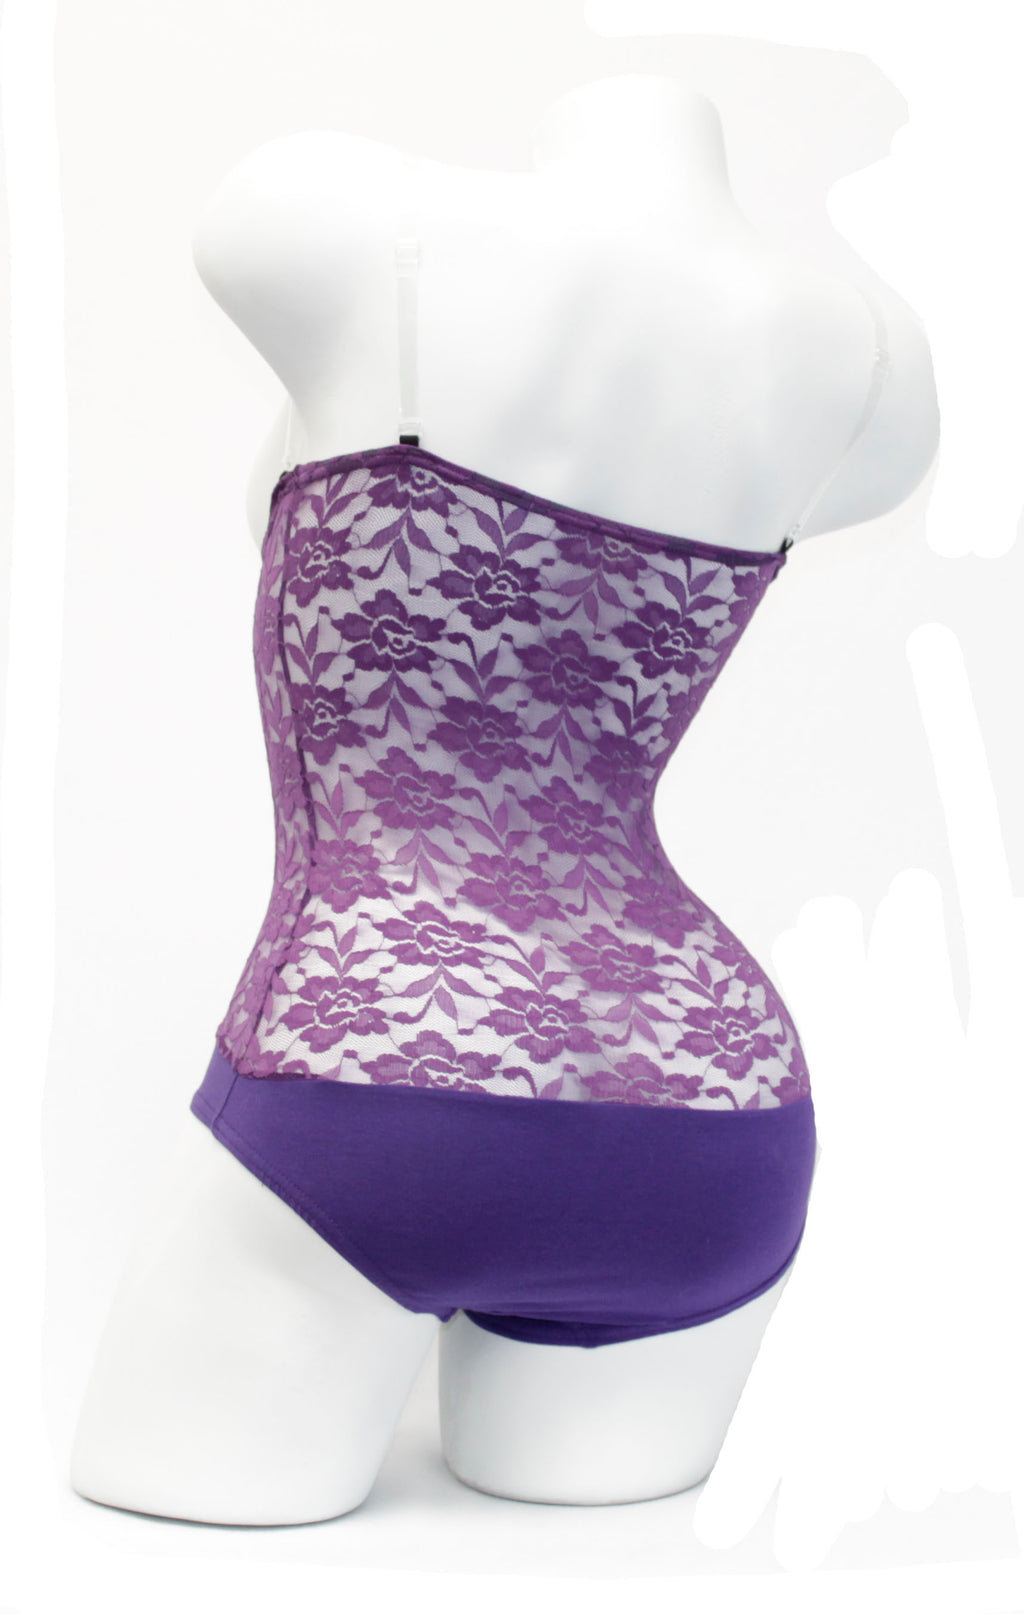 Underbust with straps - Purple Lace